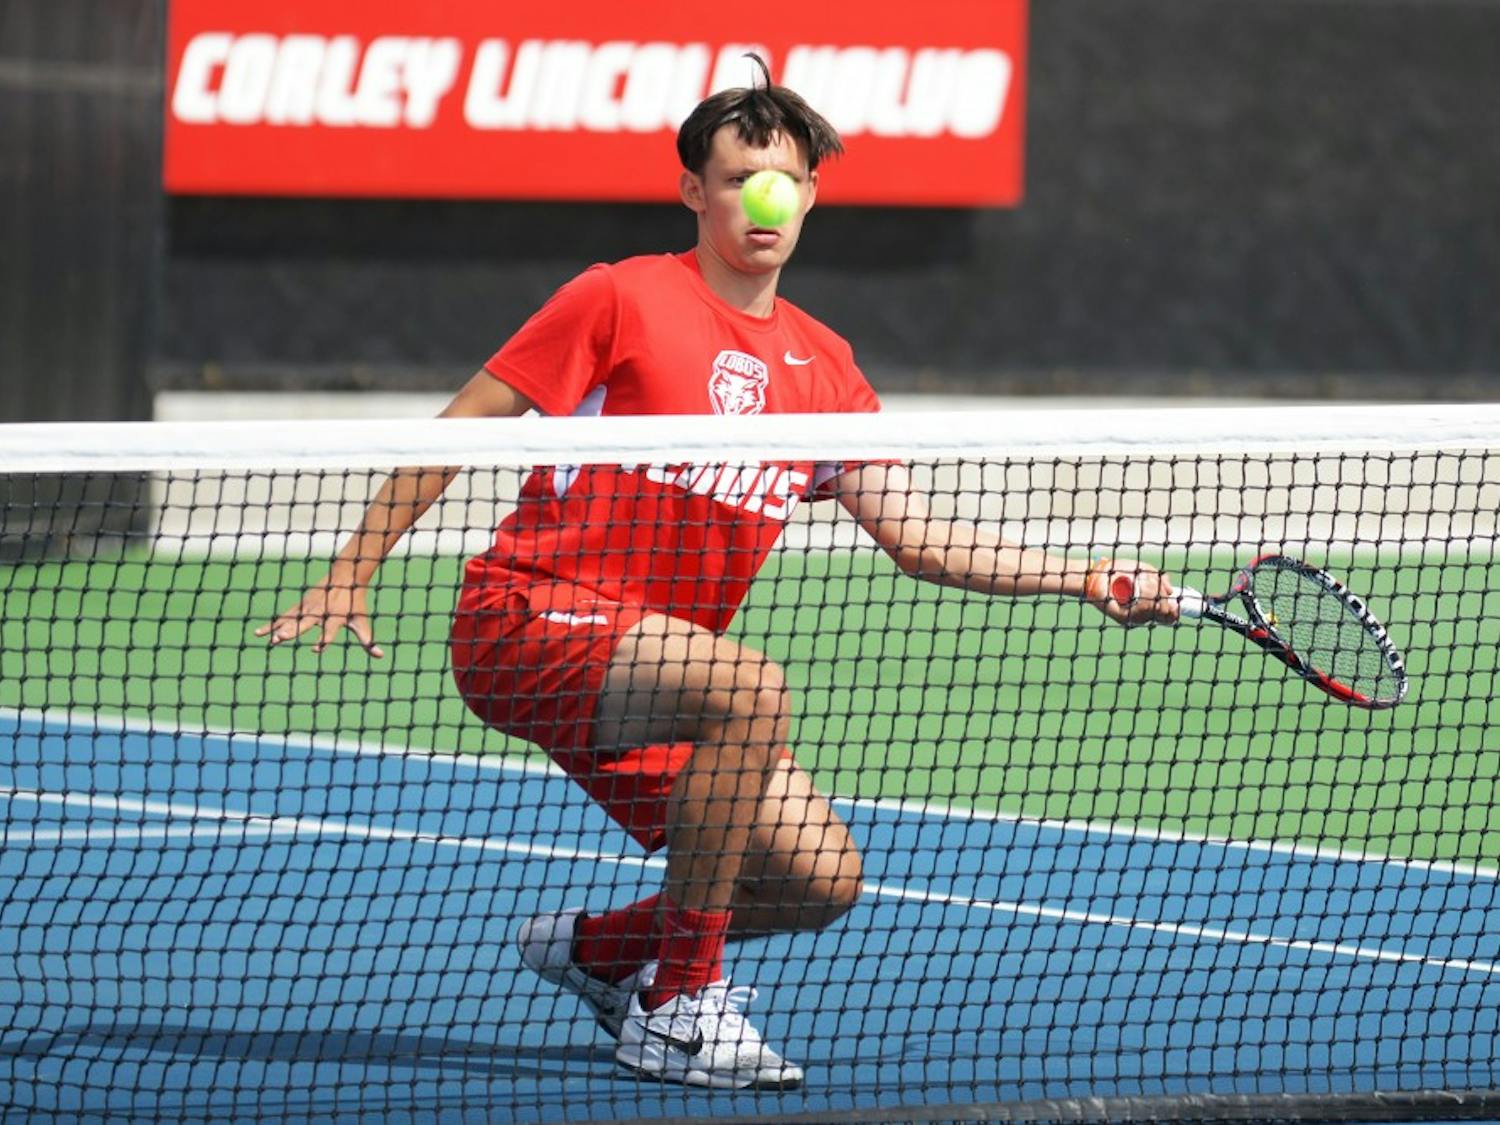 Freshman Ricky Hernandez-Tong stares down the ball after he hits it back to his opponent at the McKinnon Family Tennis Stadium. The Lobos will play in the Mountain-Pacific Invitational this upcoming weekend in Albuquerque.